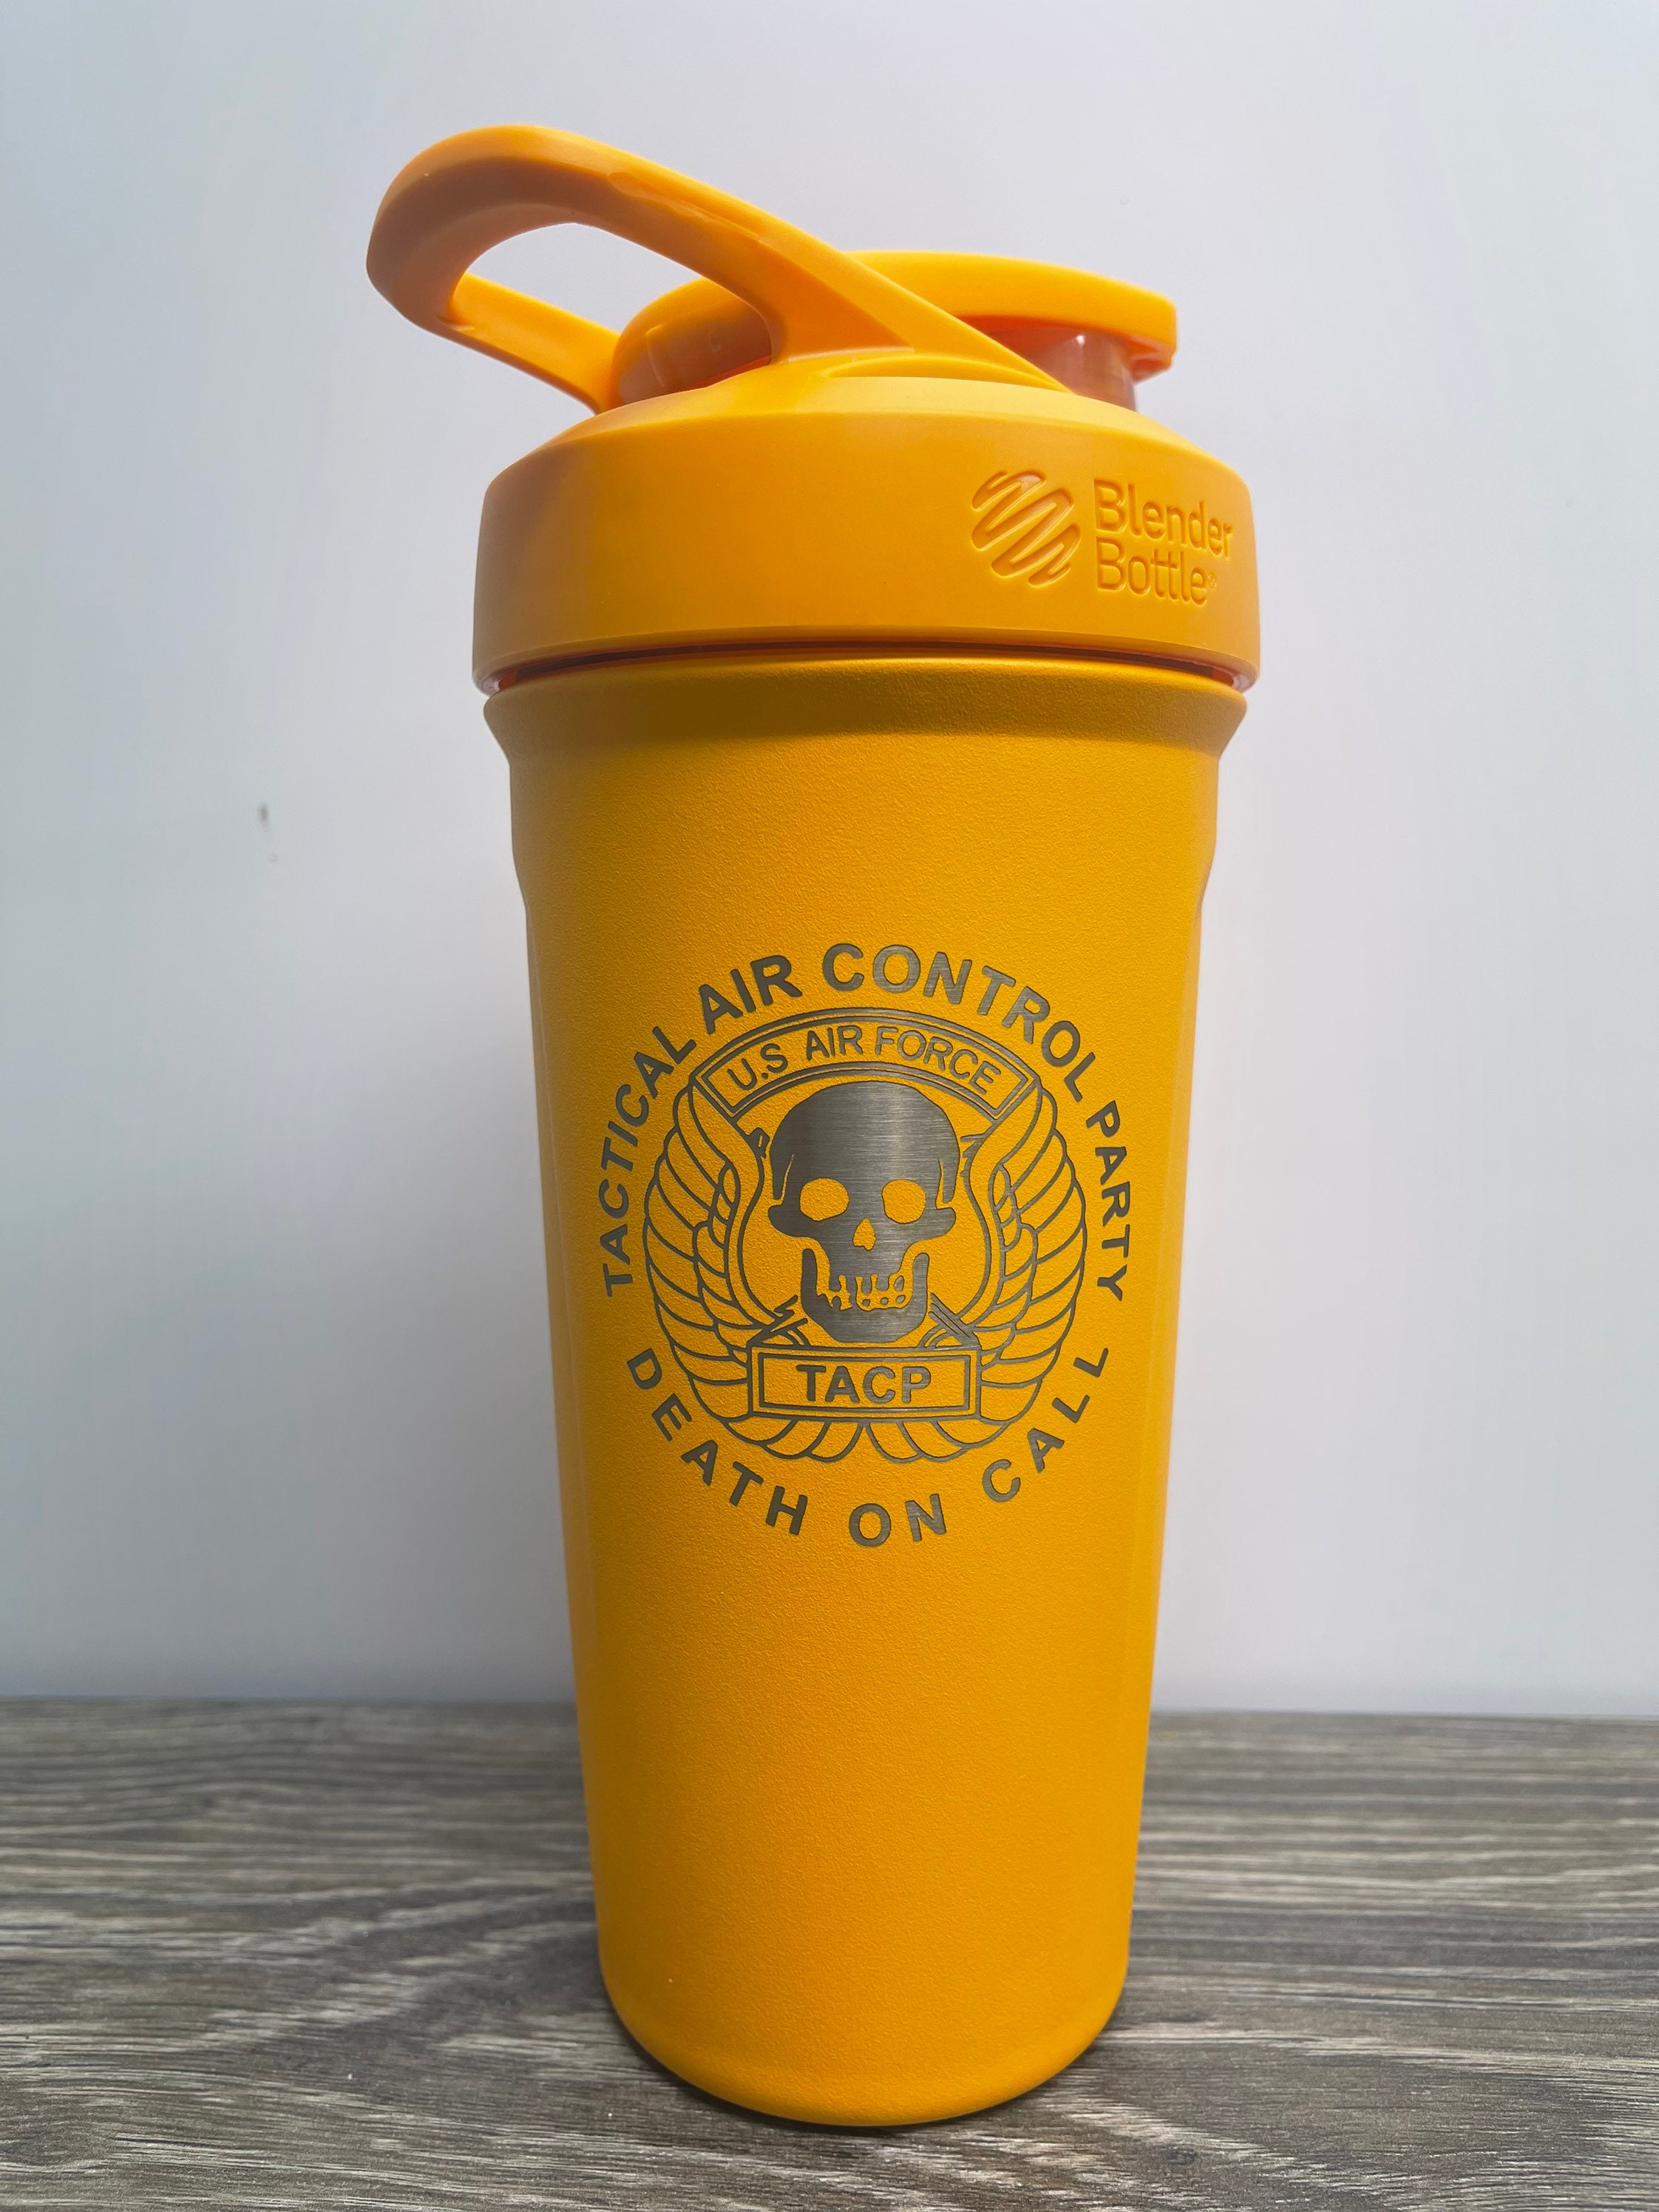 BlenderBottle Strada Shaker Cup Perfect for Protein Shakes and Pre Workout, 24-Ounce, Yellow